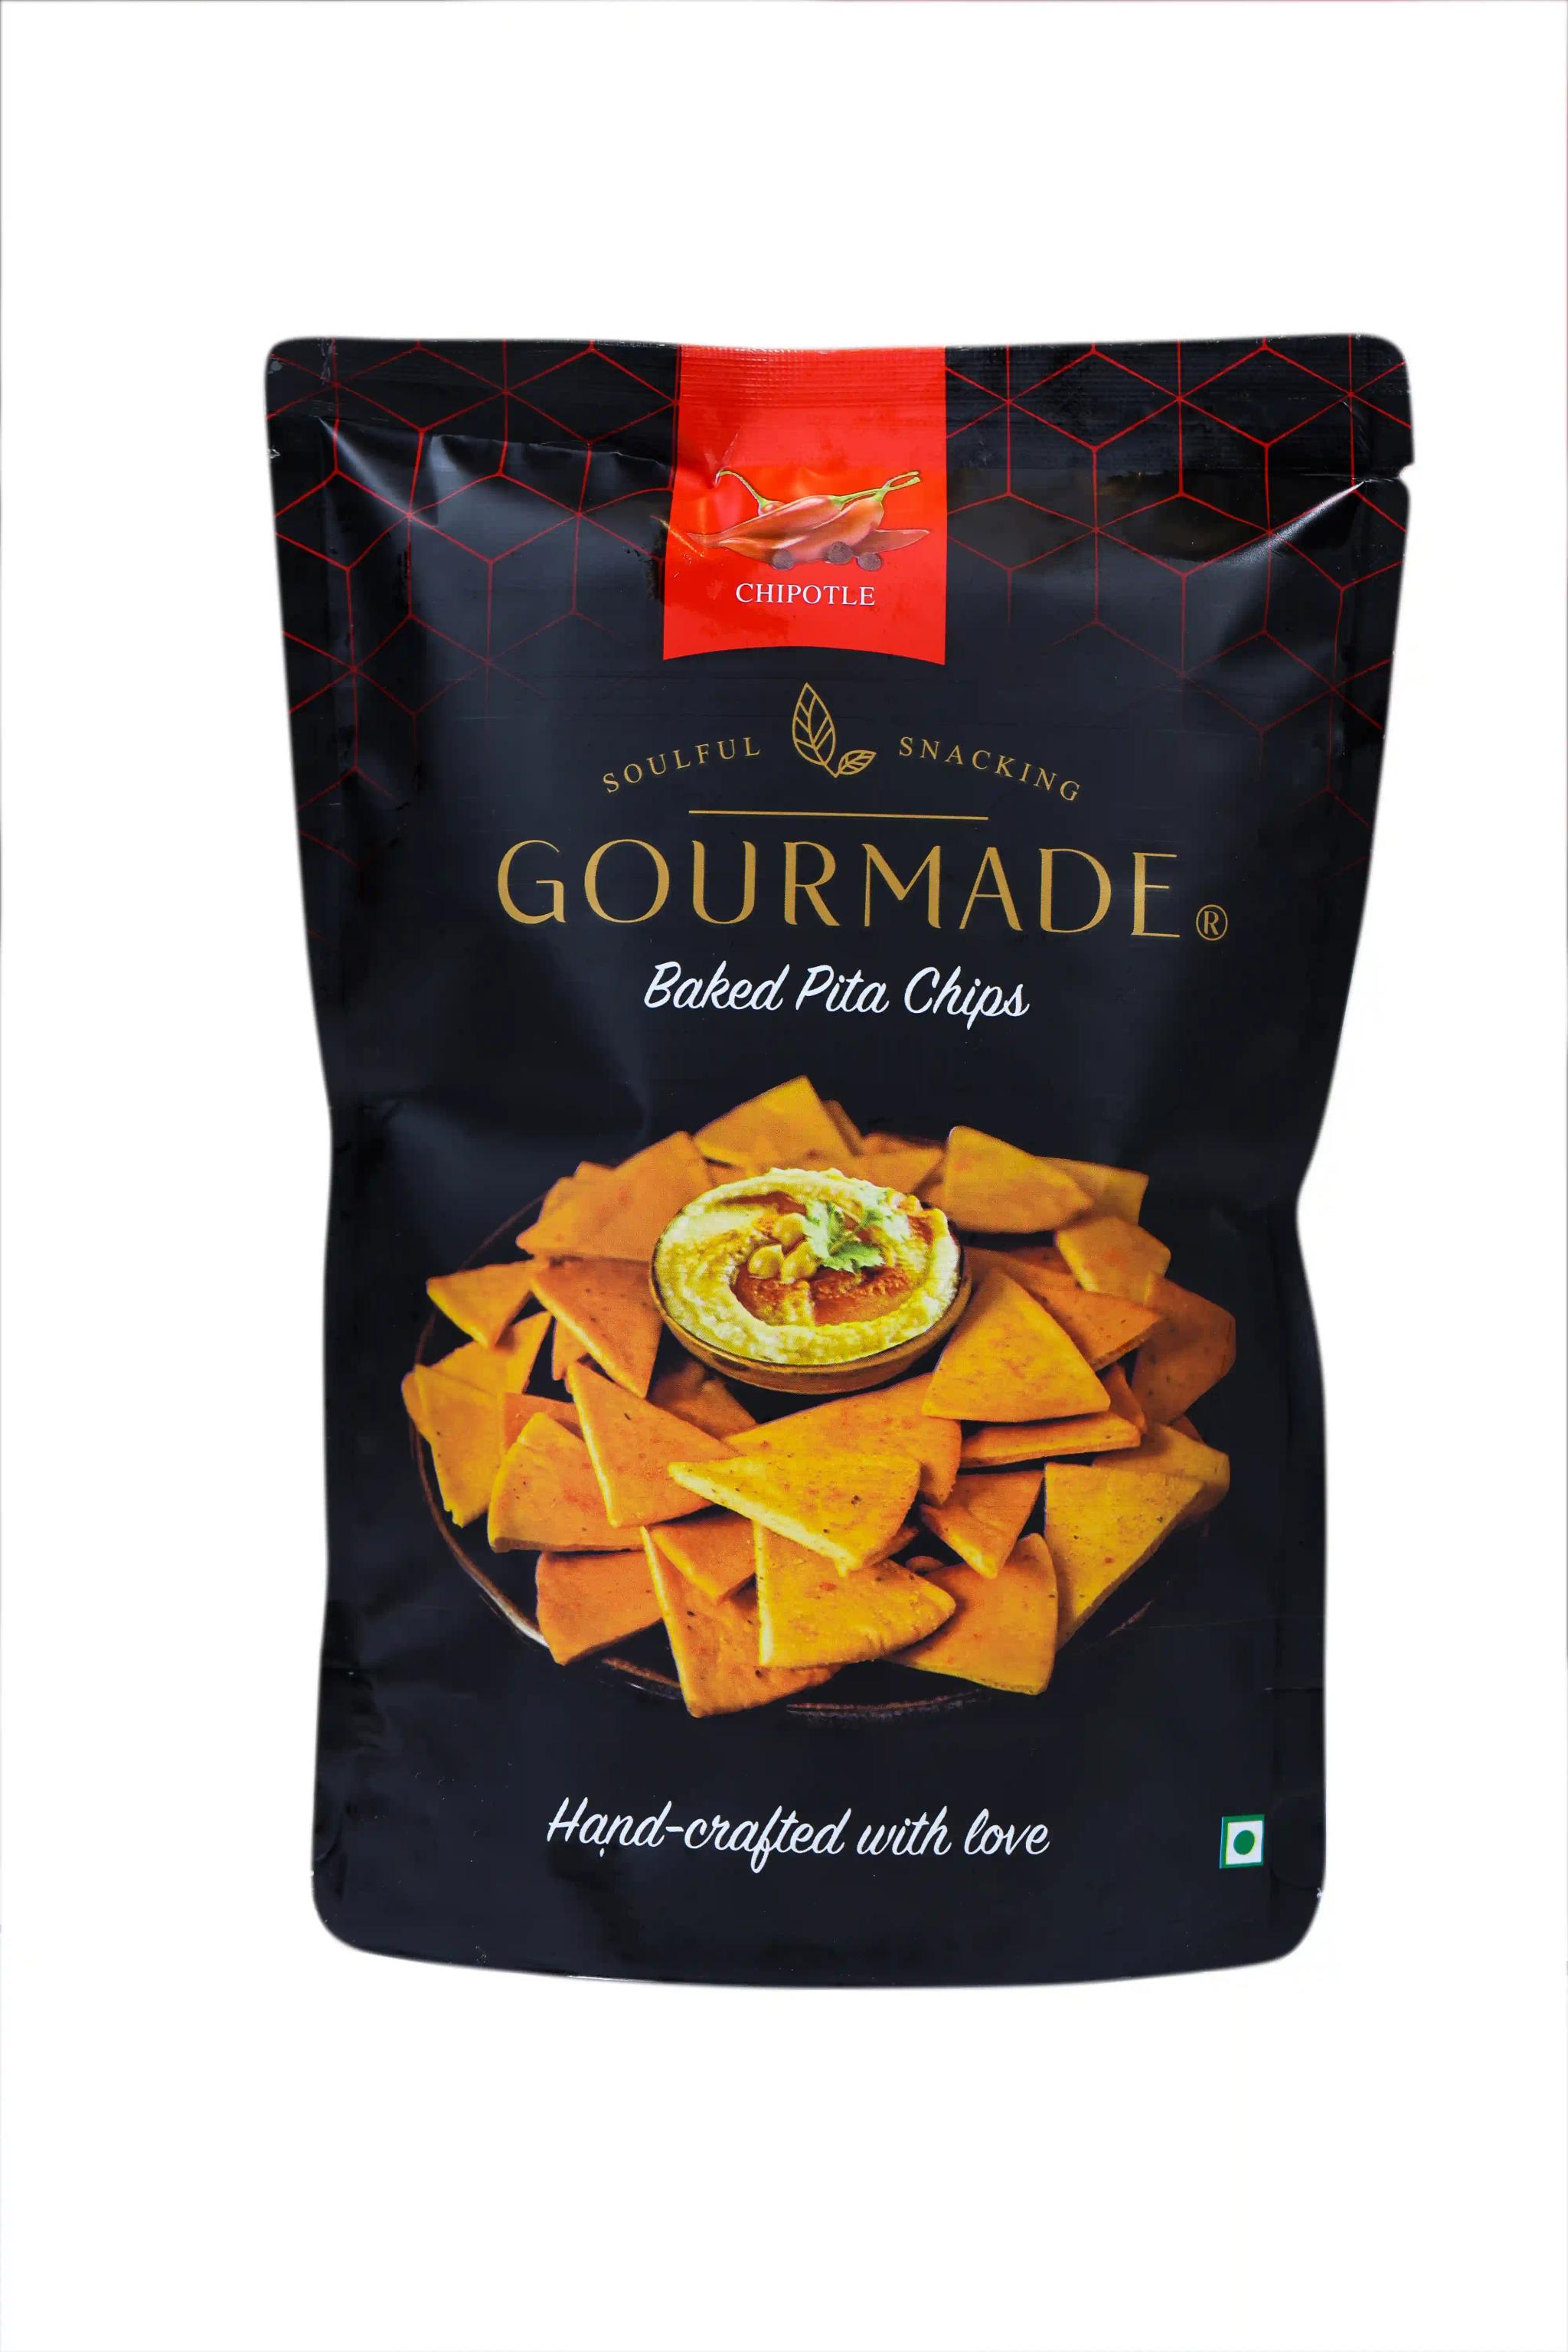 Gourmade Pita Chips Snacking Combo of 2 Chipotle, 1 Roasted Garlic (375gm)